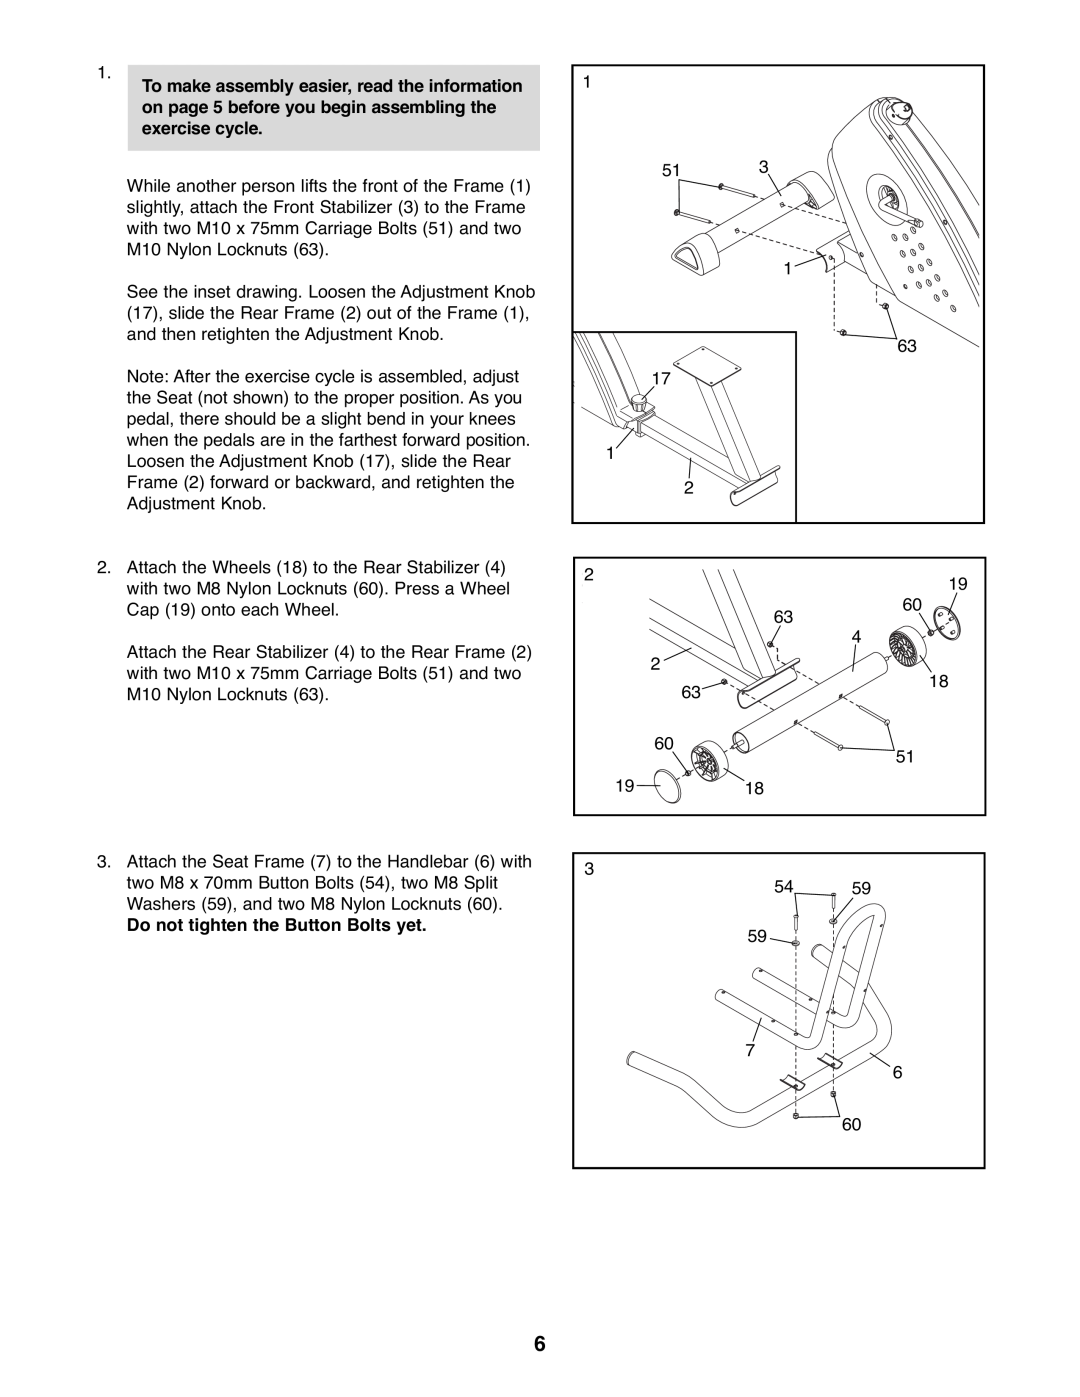 ProForm PFEX1995.1 user manual Do not tighten the Button Bolts yet 